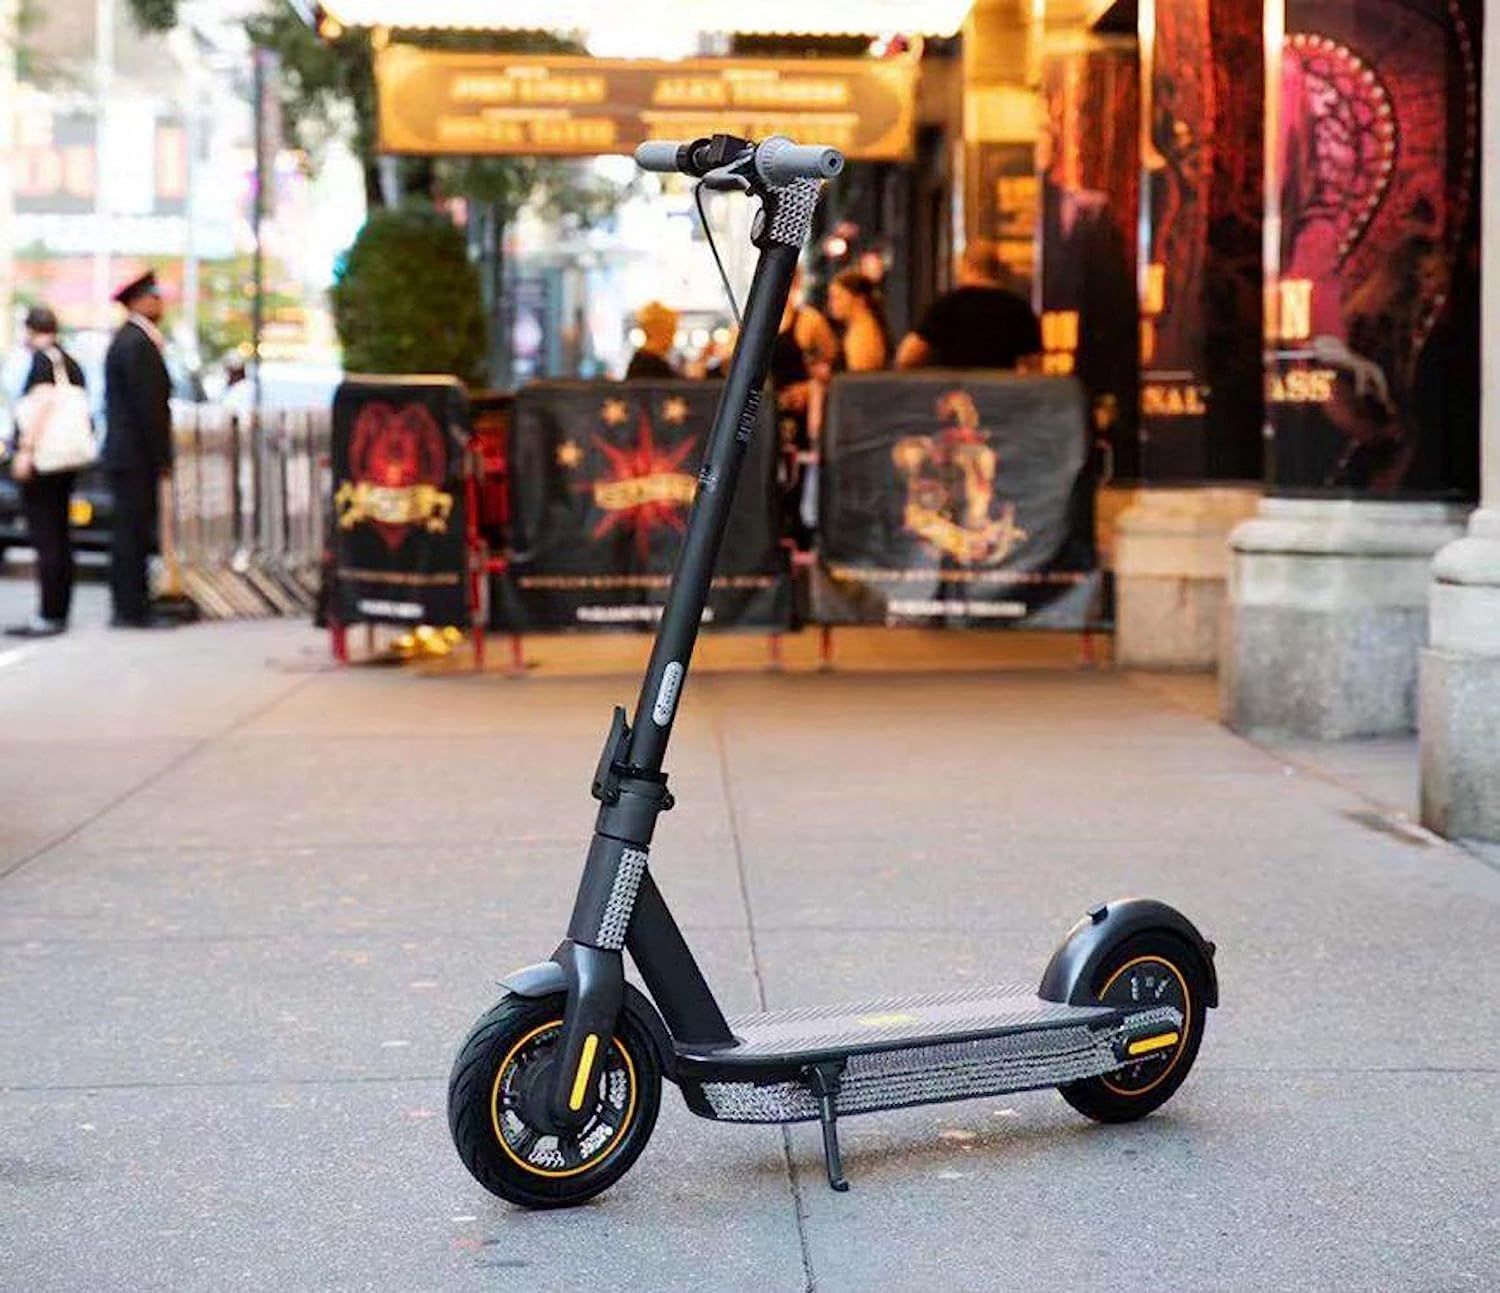 Electric Ride Nerd - "Zoom in Style: 5 Essential E-Scooter Accessories for Stylish Rides "